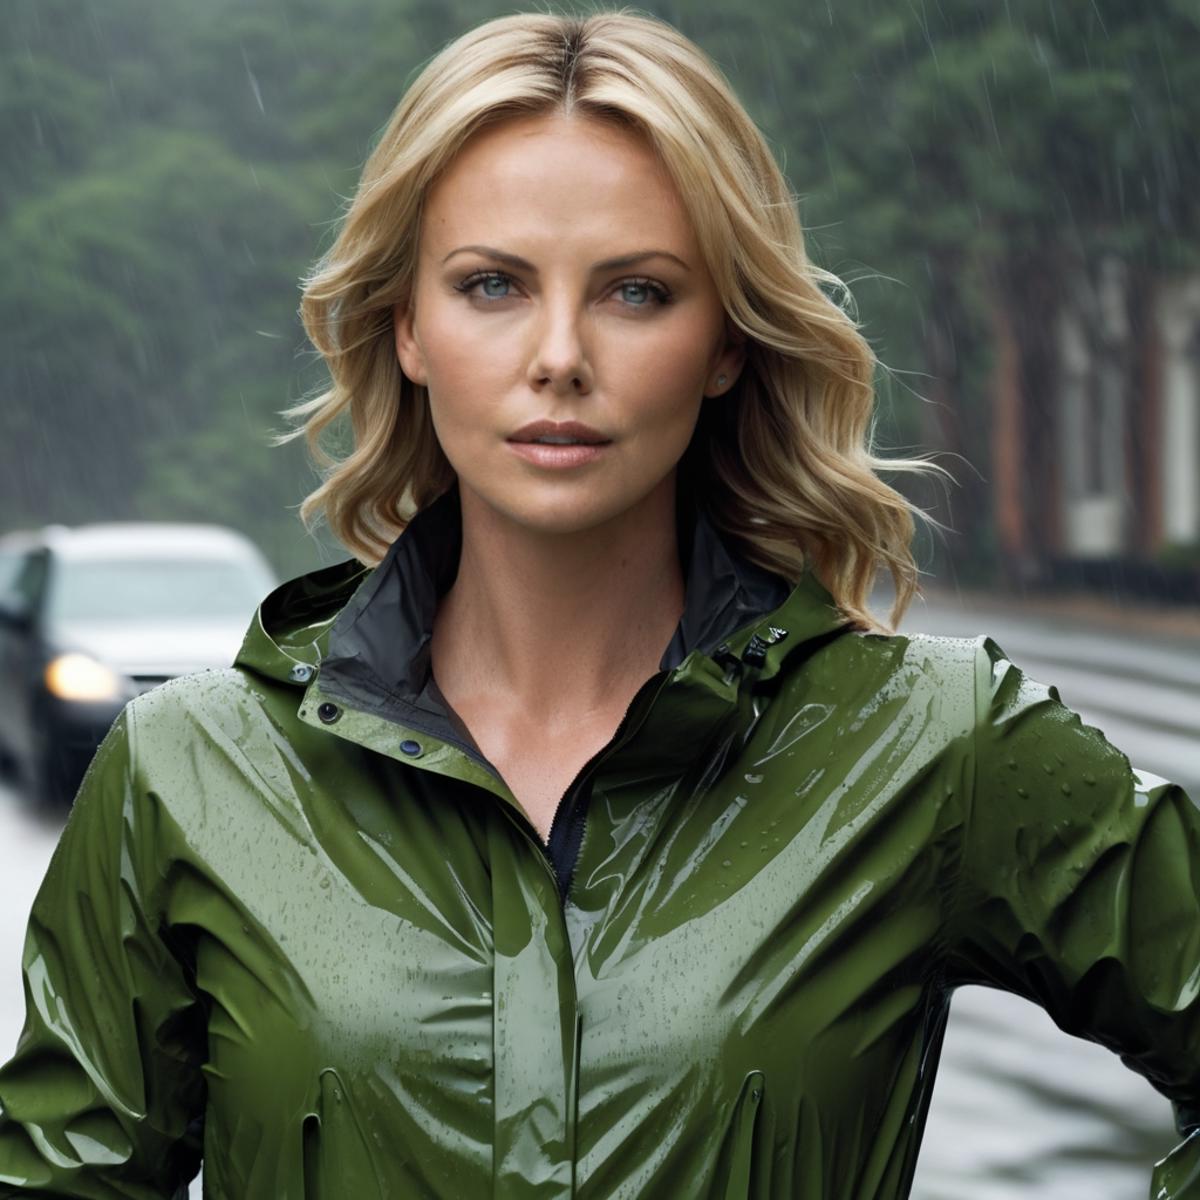 Woman wearing a green jacket and standing in the rain.